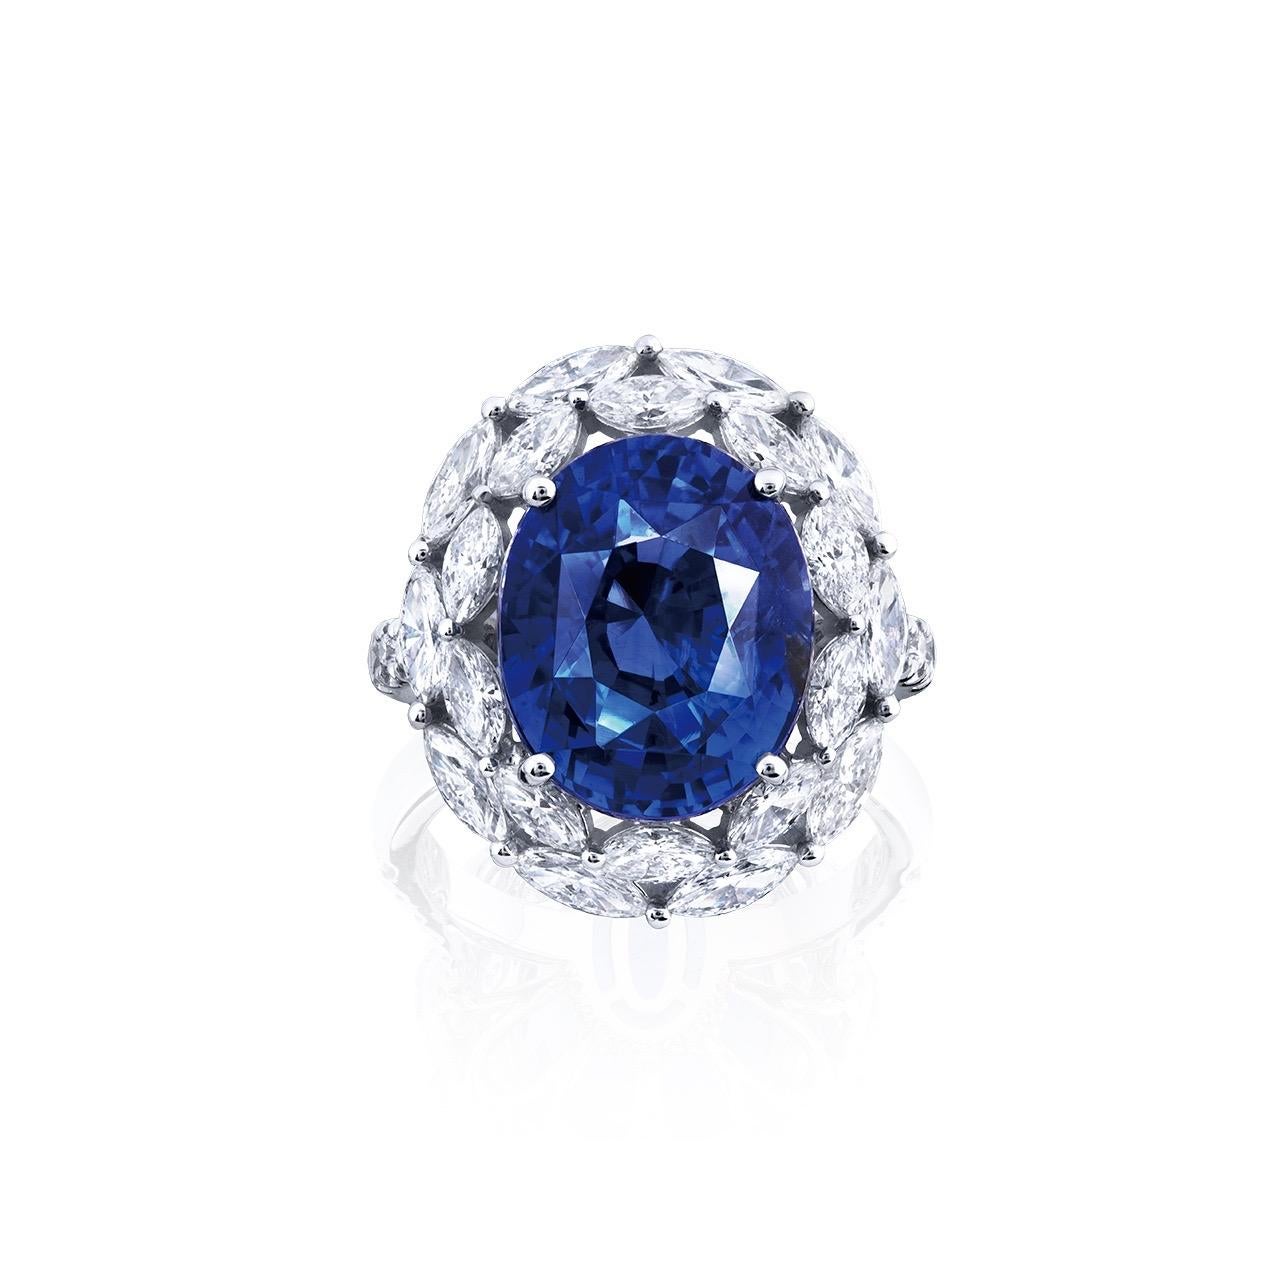 From Emilio Jewelry, a well known and respected wholesaler/dealer located on New York’s iconic Fifth Avenue, 
Focal point: Gorgeous cornflower blue 12.20ct + Unheated sapphire 
Total weight listed in the title. 
Please inquire for more images,